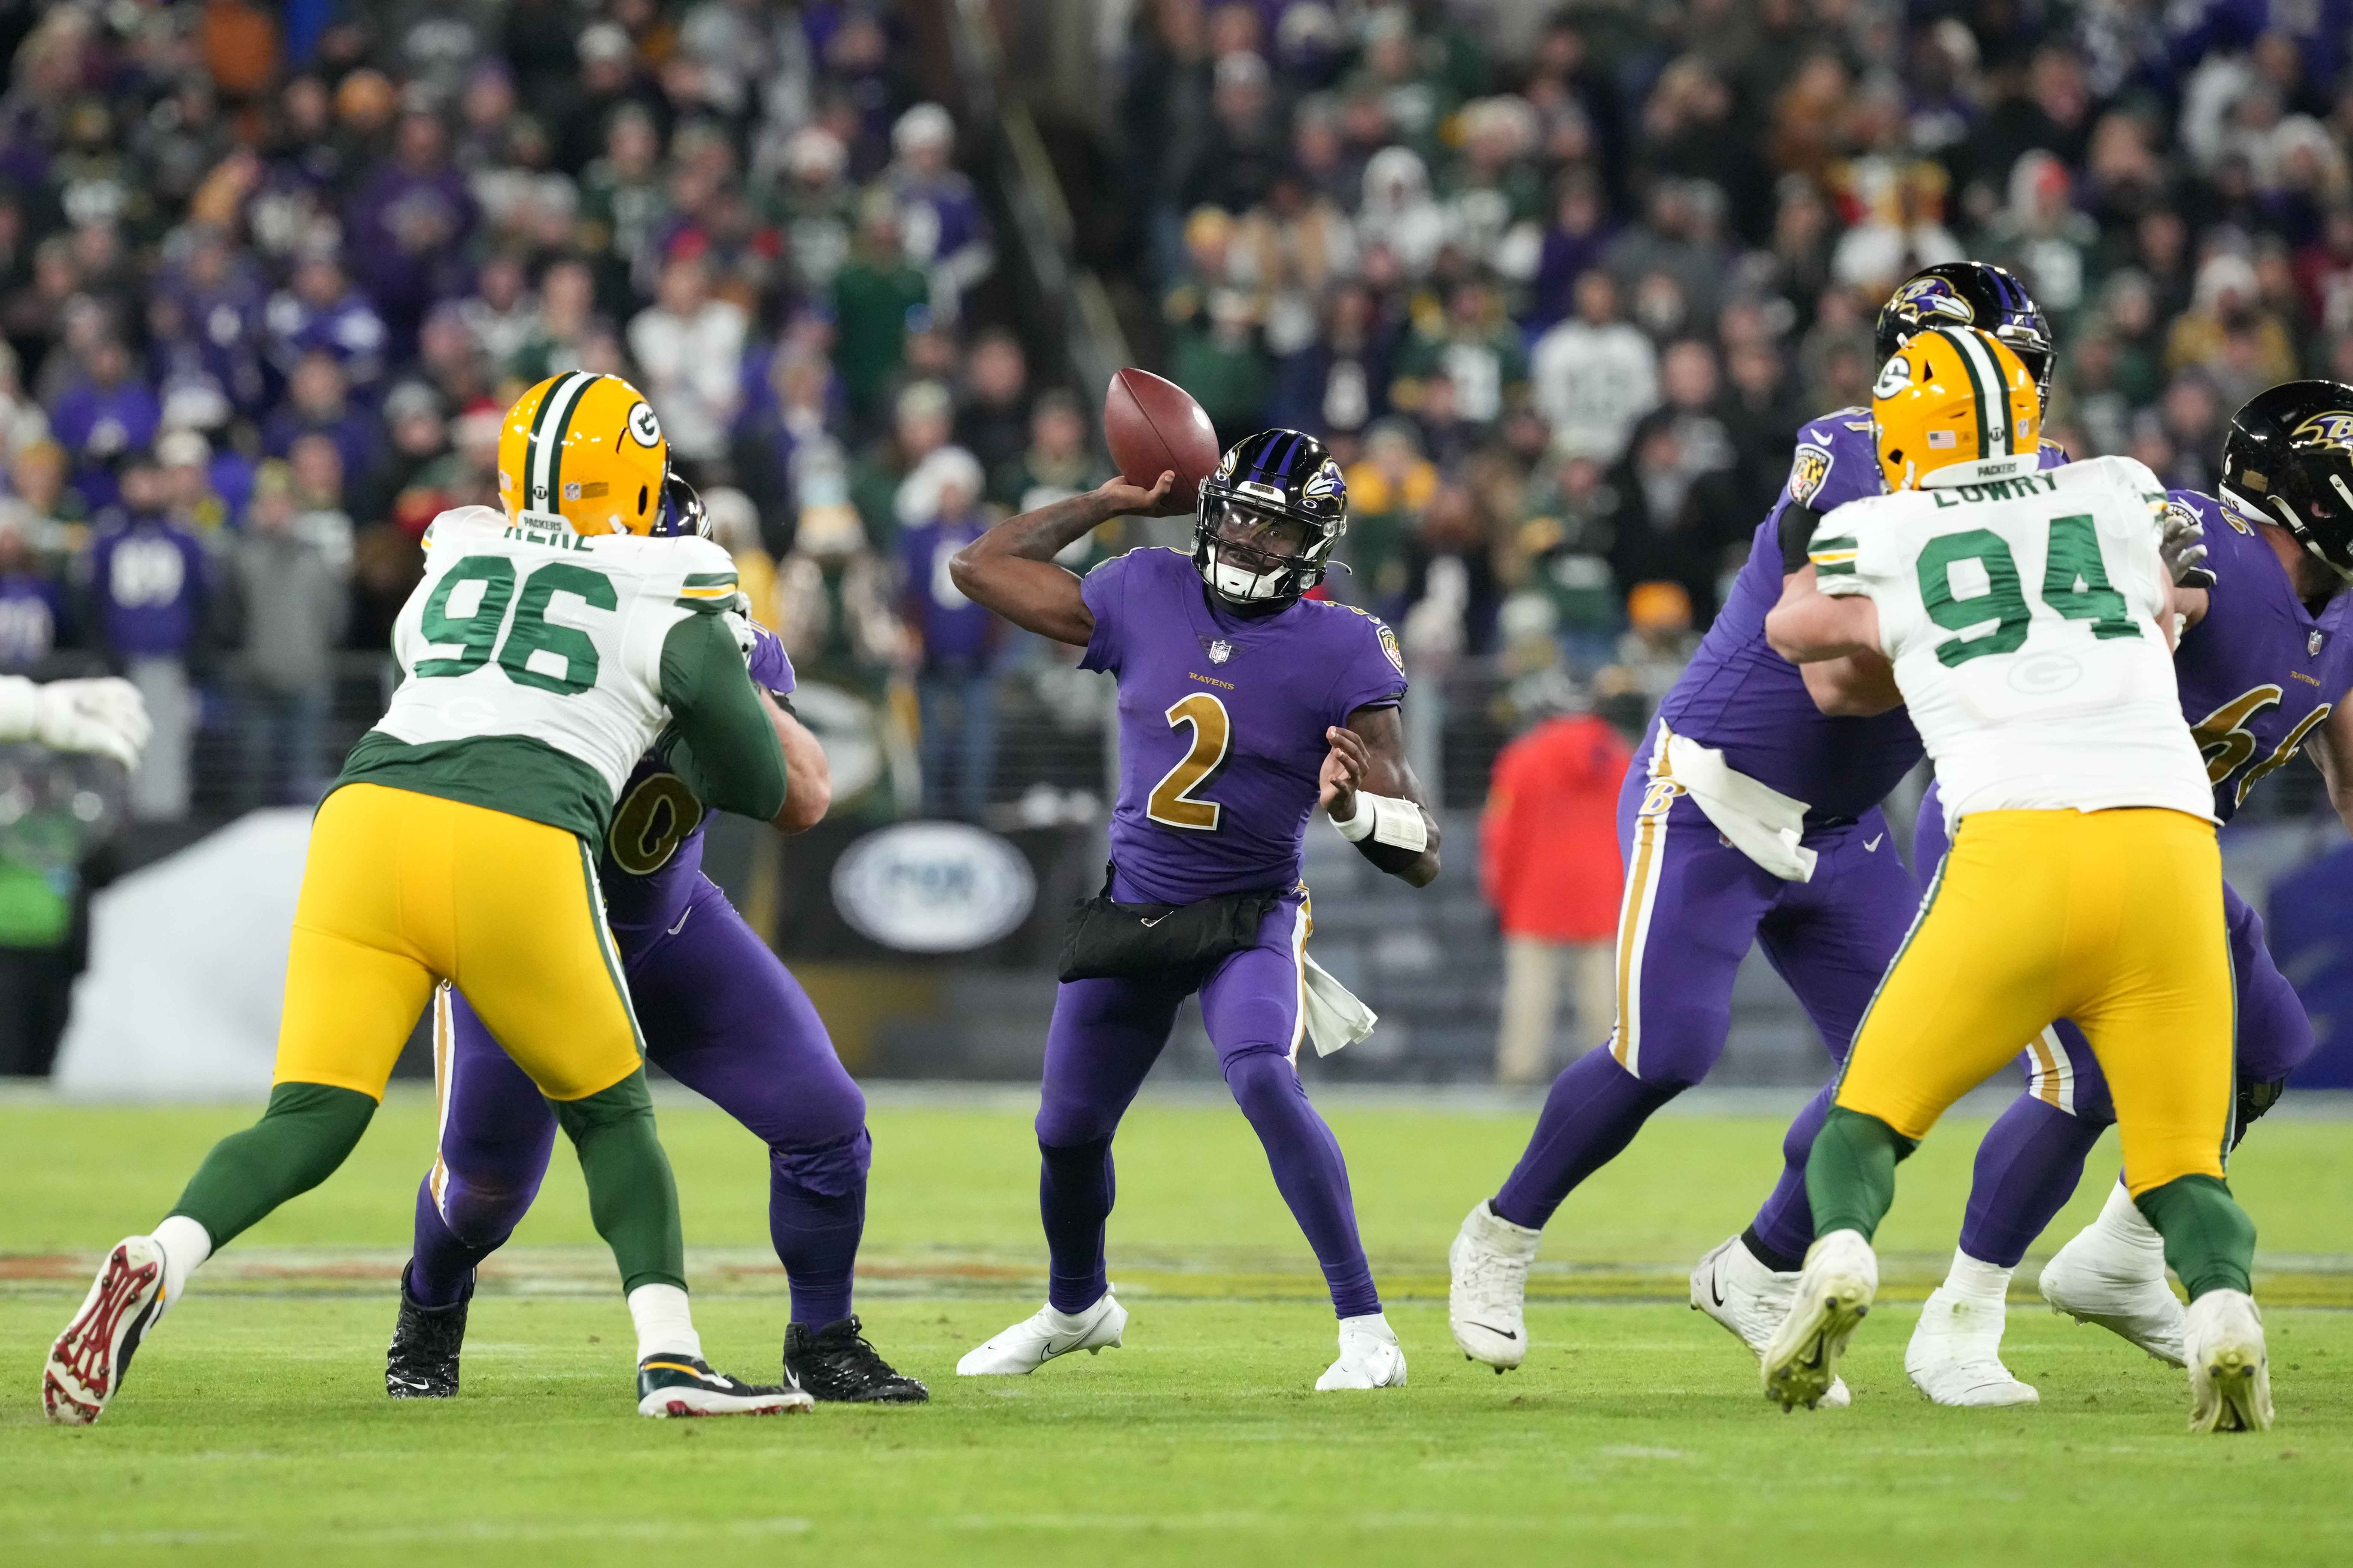 Green Bay Packers v. Ravens: Behind the Numbers